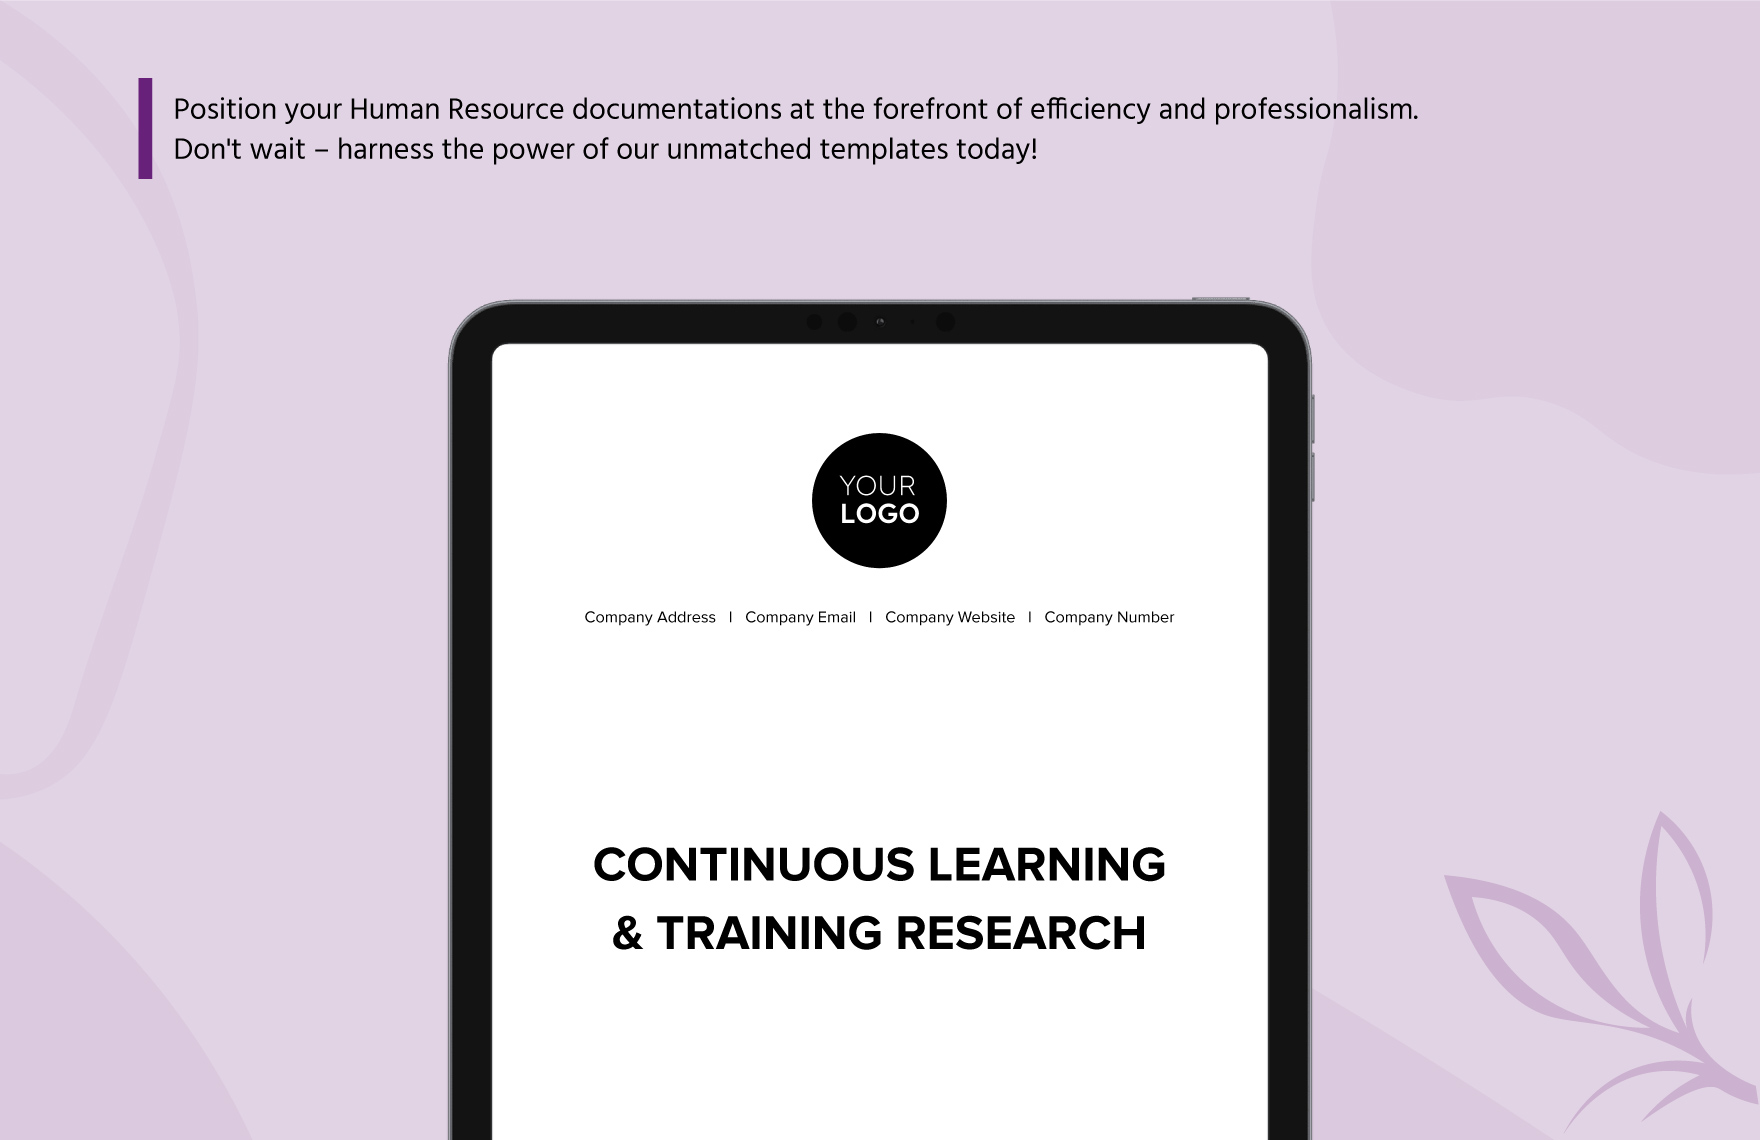 Continuous Learning & Training Research HR Template